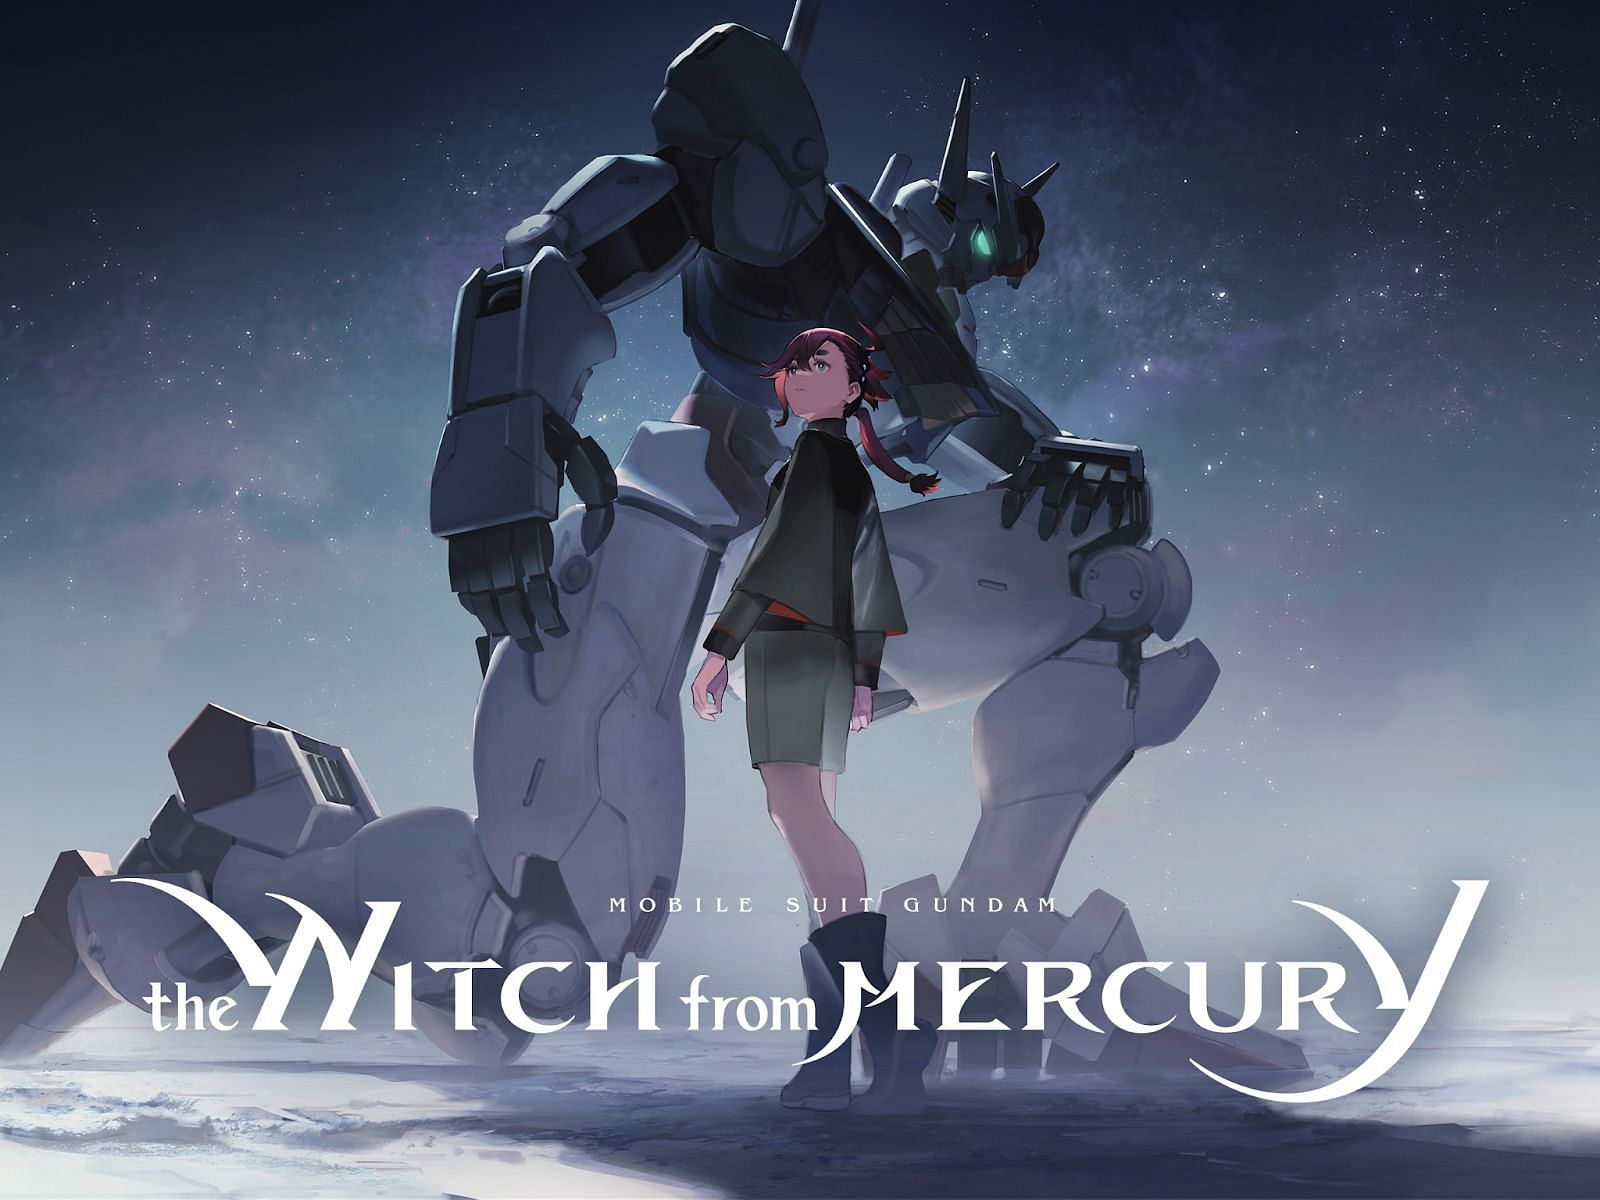 How many episodes are in Mobile Suit Gundam: Witch from Mercury?